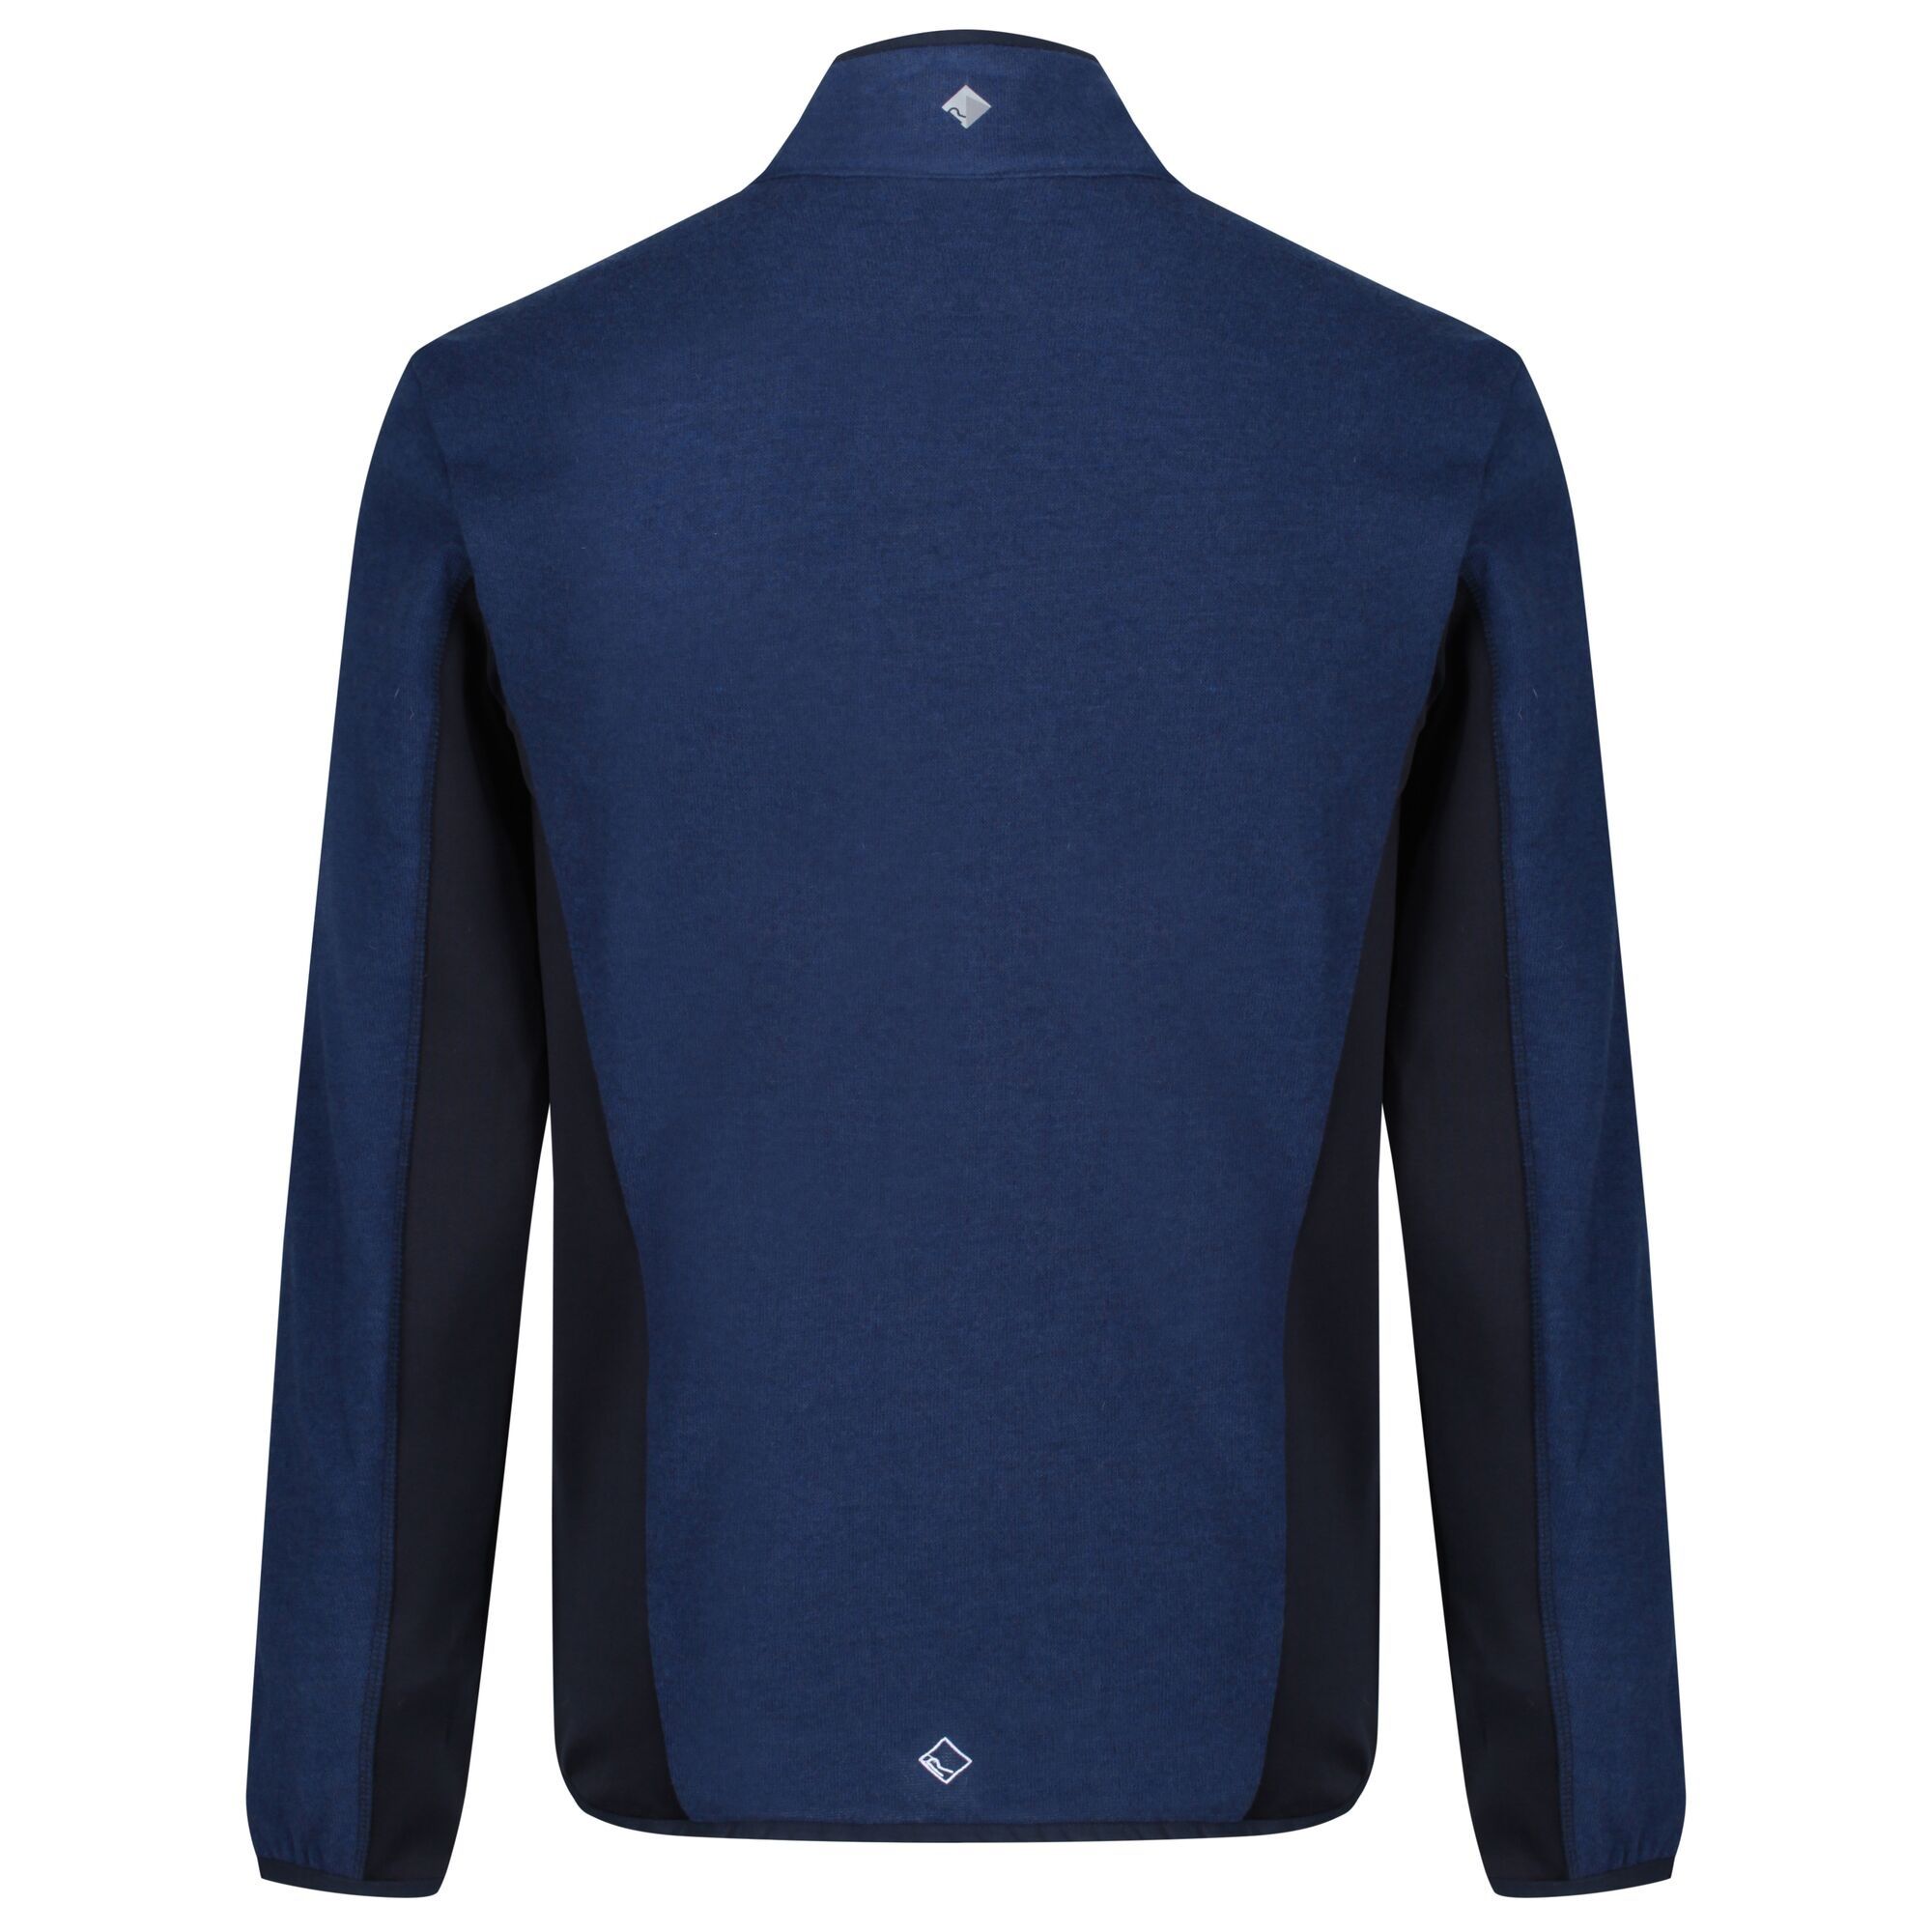 50% wool/50% polyester knit effect fleece. Extol stretch side and underarm panels. 2 zipped lower pockets and 1 zipped sleeve pocket. Stretch binding to collar, cuffs and hem.